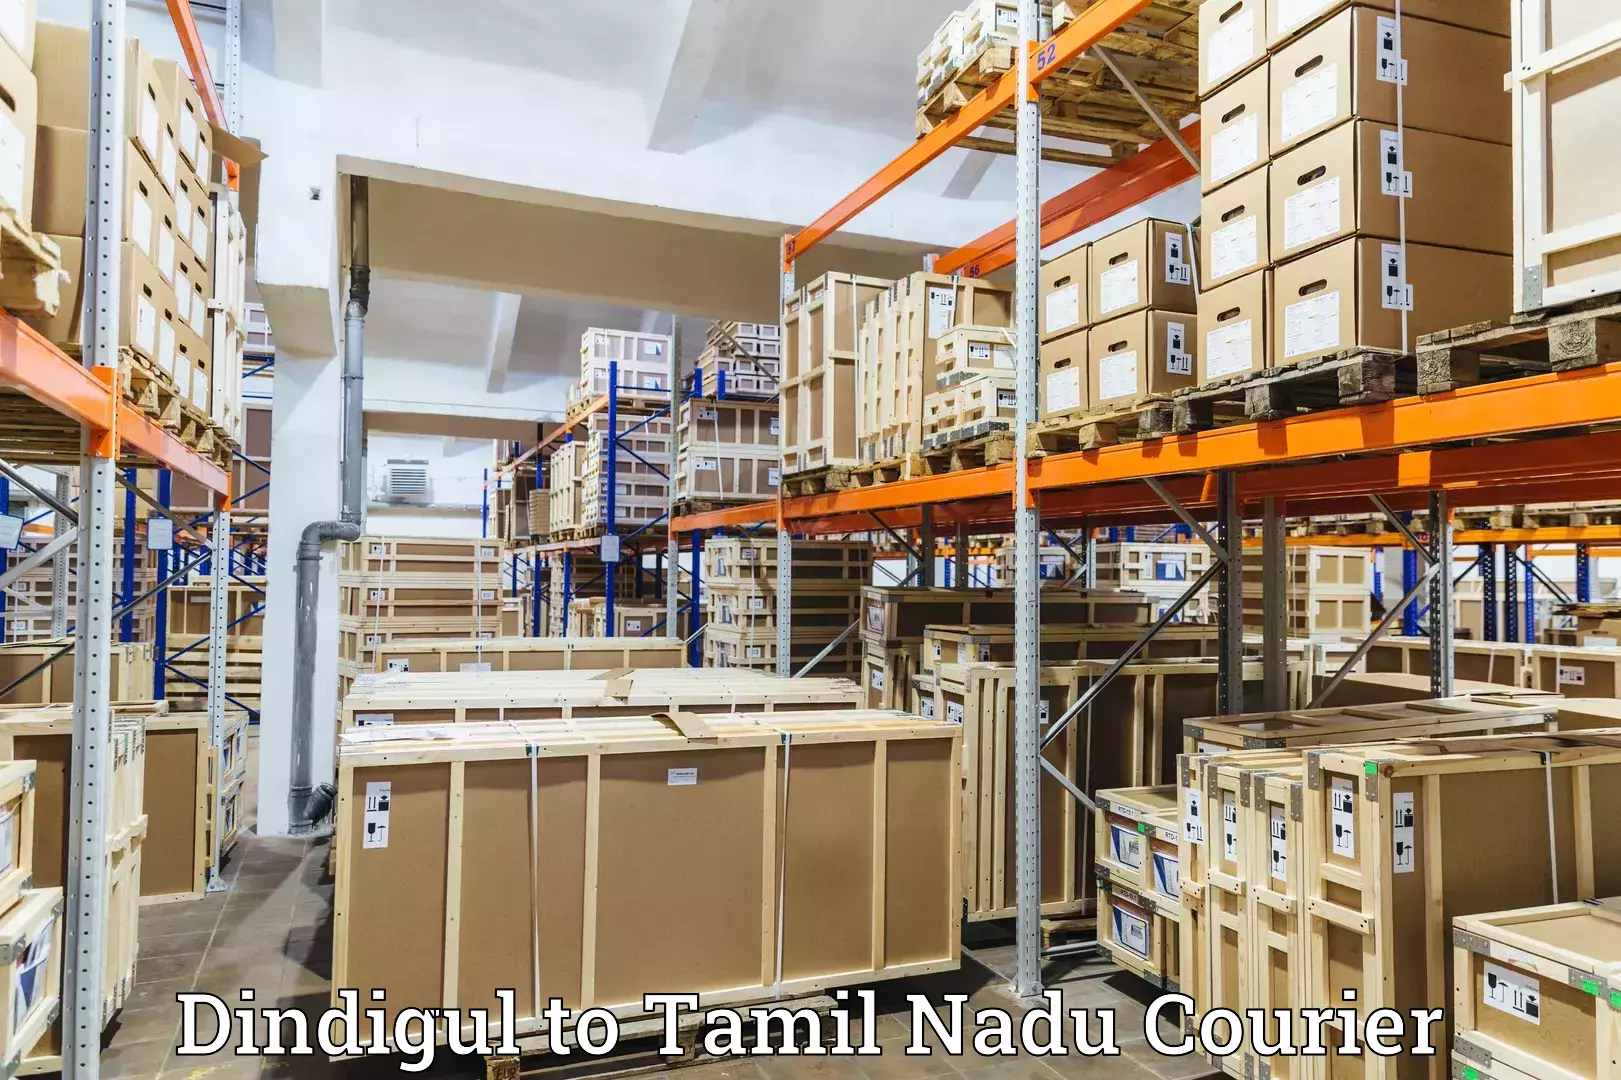 Nationwide parcel services Dindigul to Cuddalore